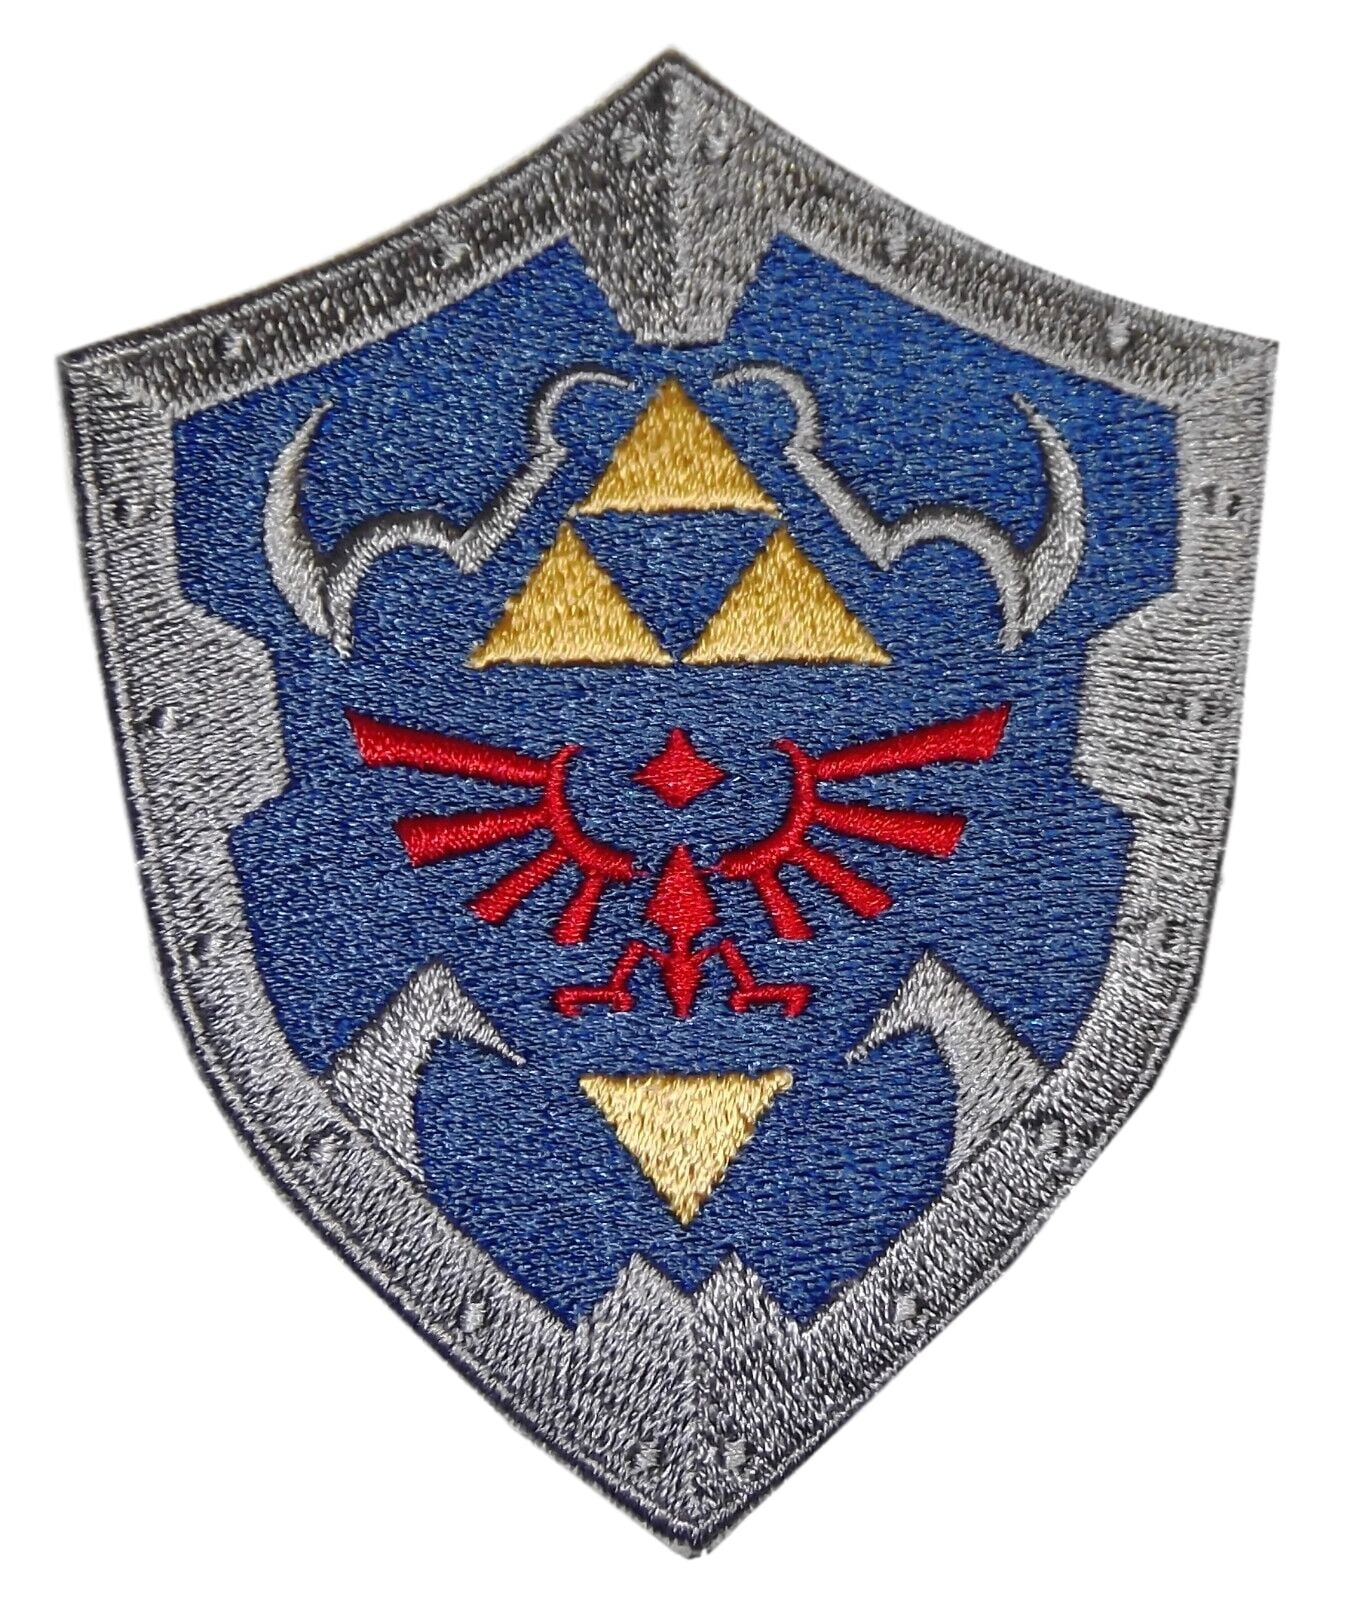 THE LEGEND OF ZELDA EMBROIDERED 4.0 INCH IRON ON PATCH 